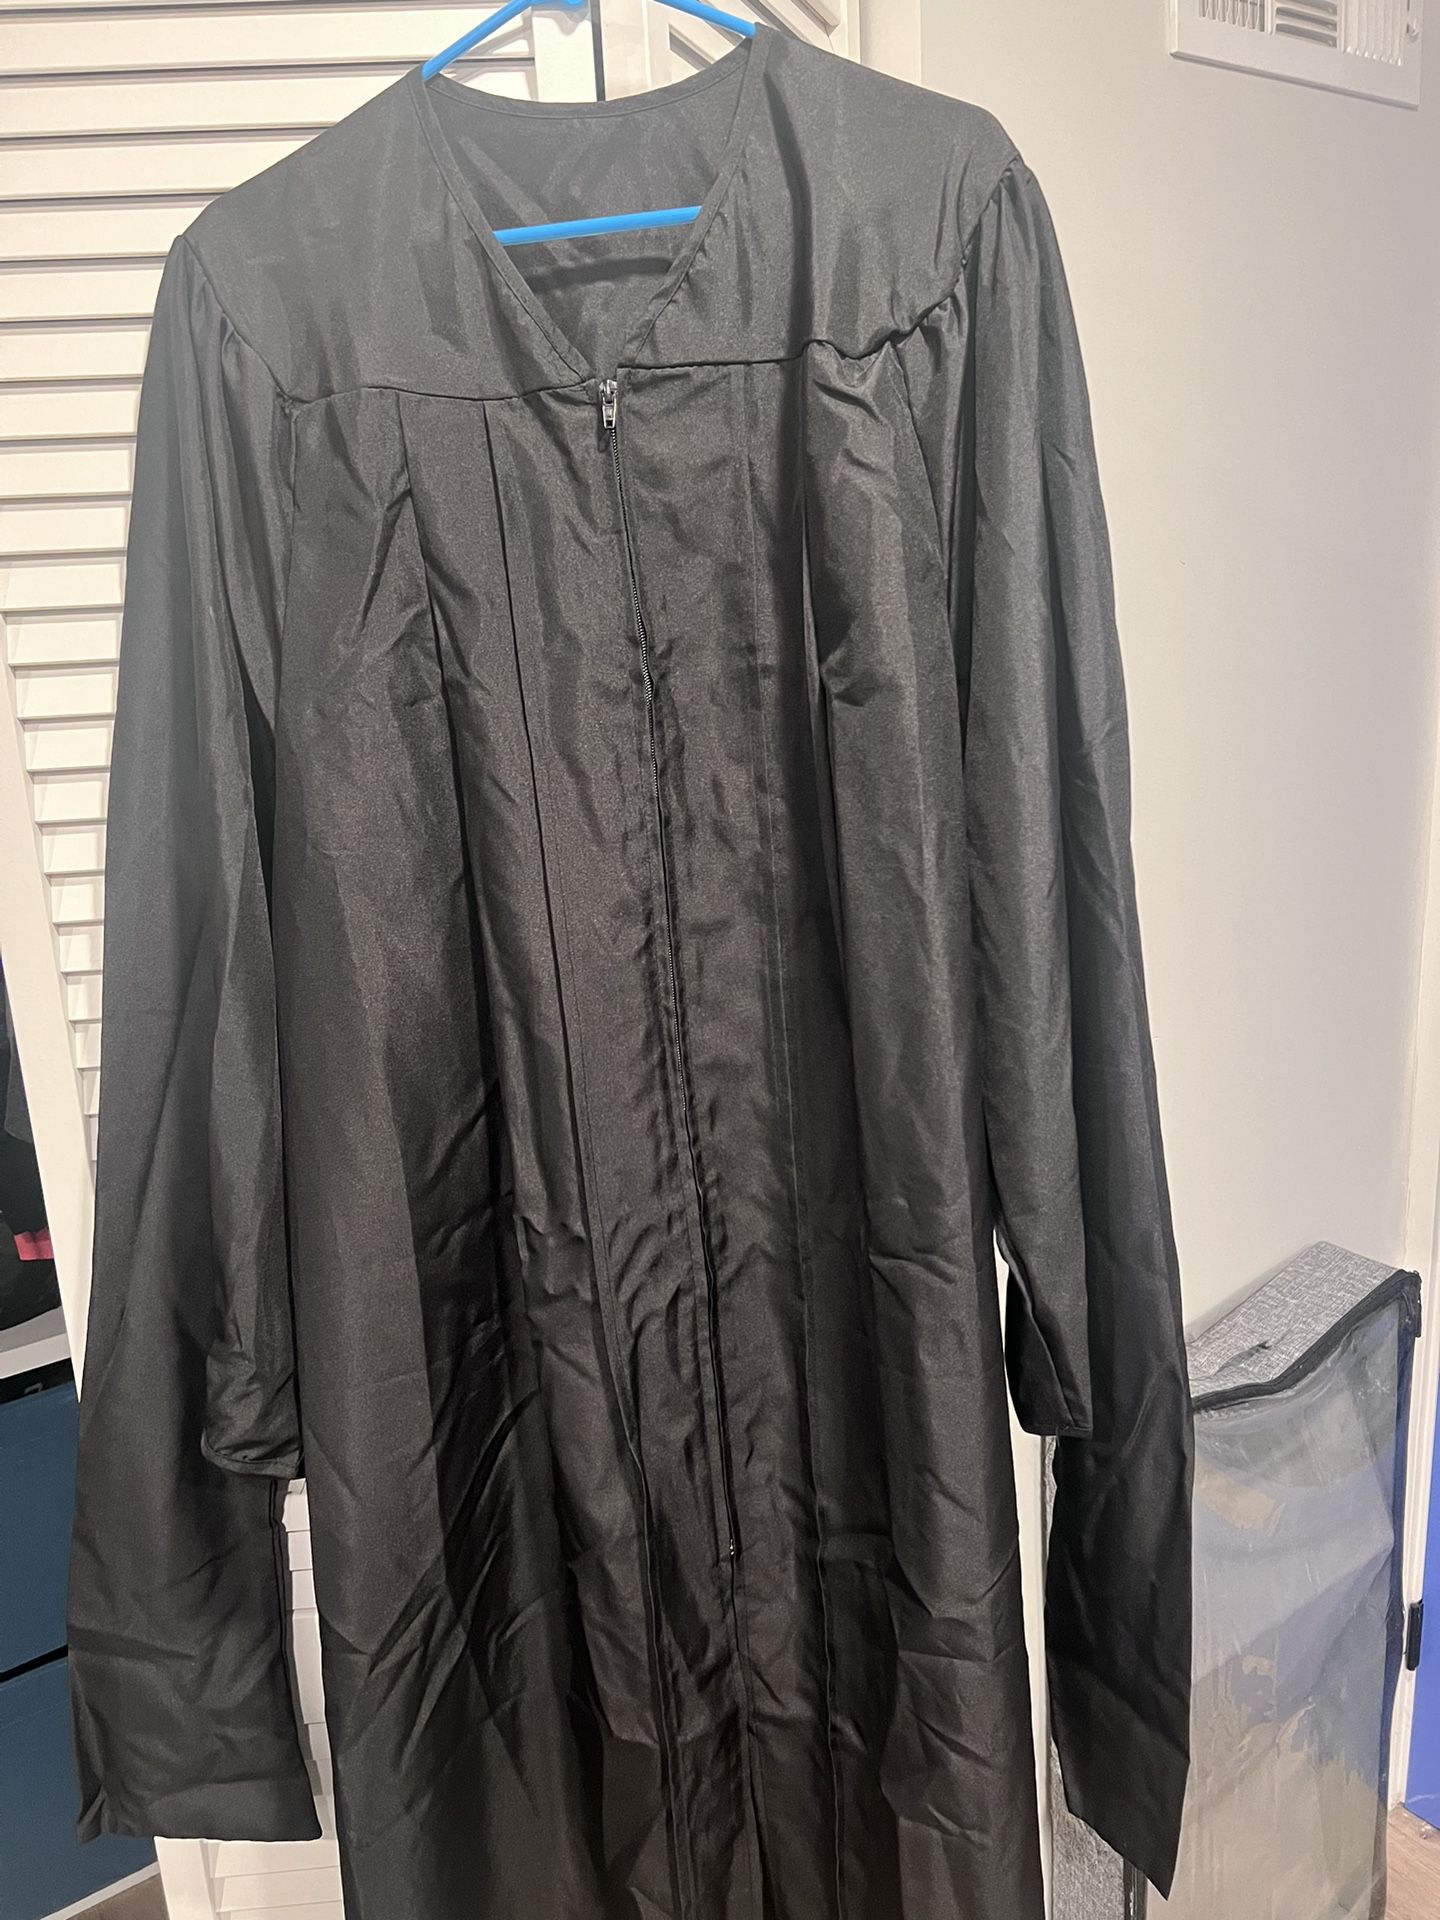 Brand New Graduation Cap And Gown 